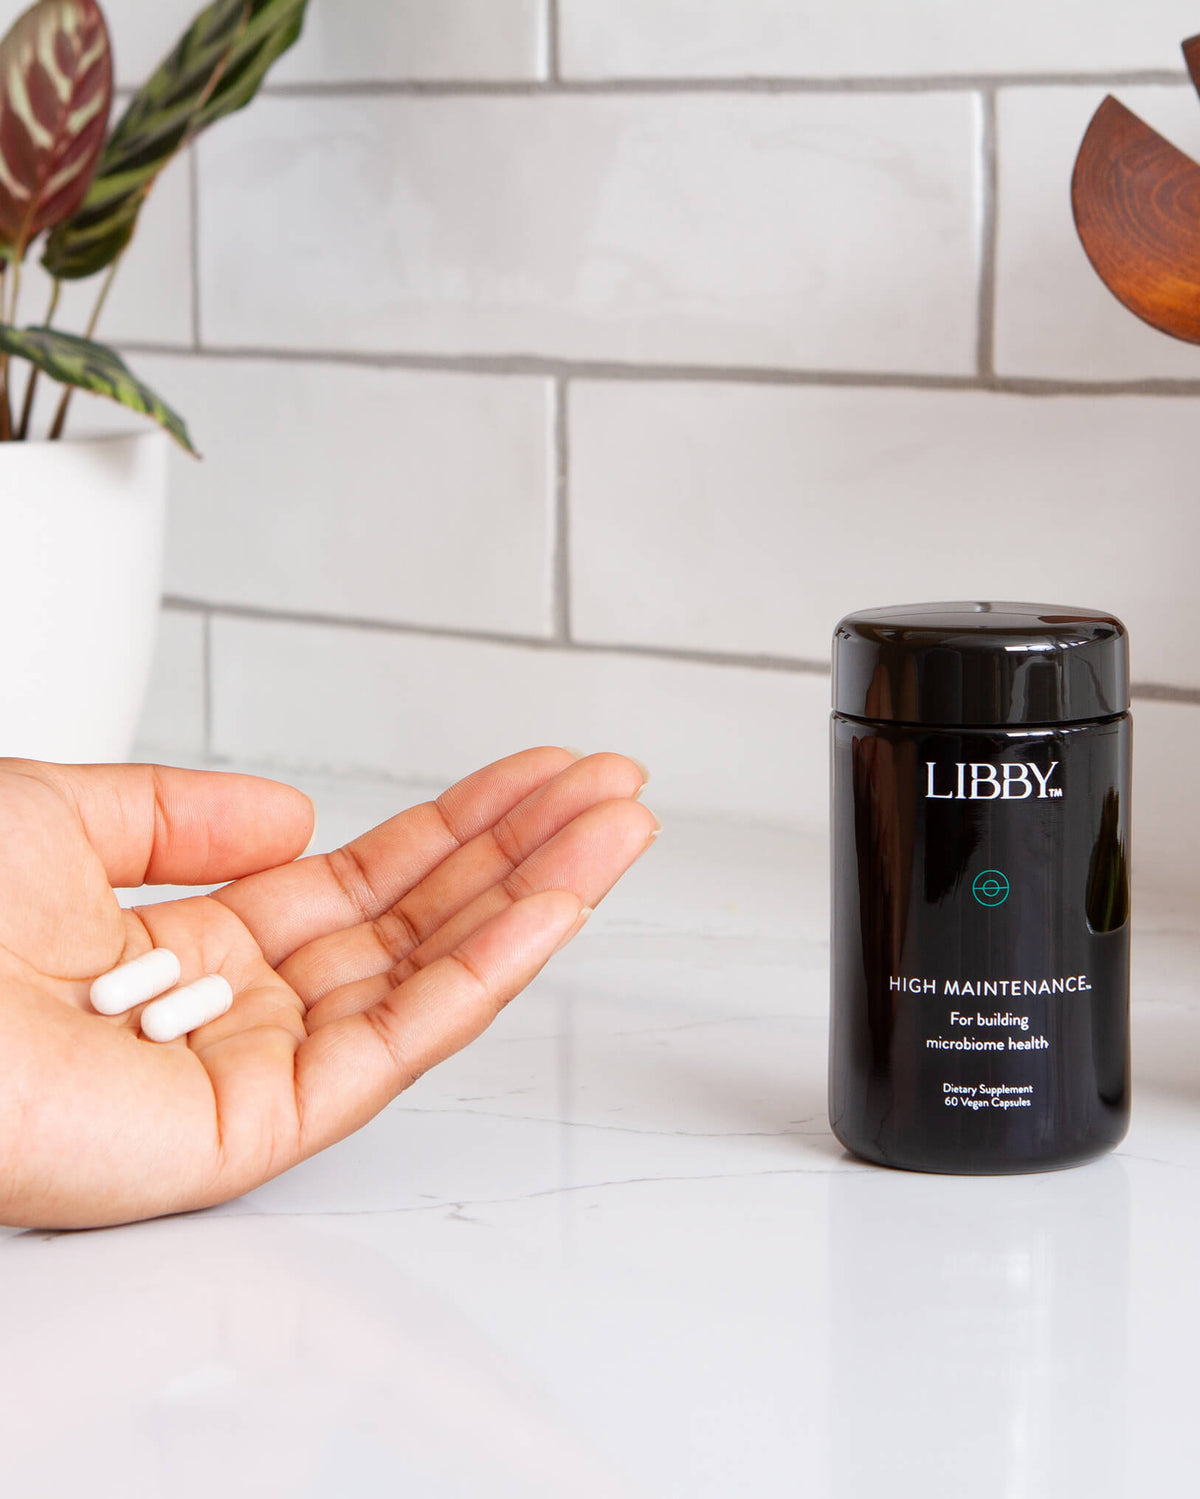 High Maintenance supplement from Libby in palm of hand.